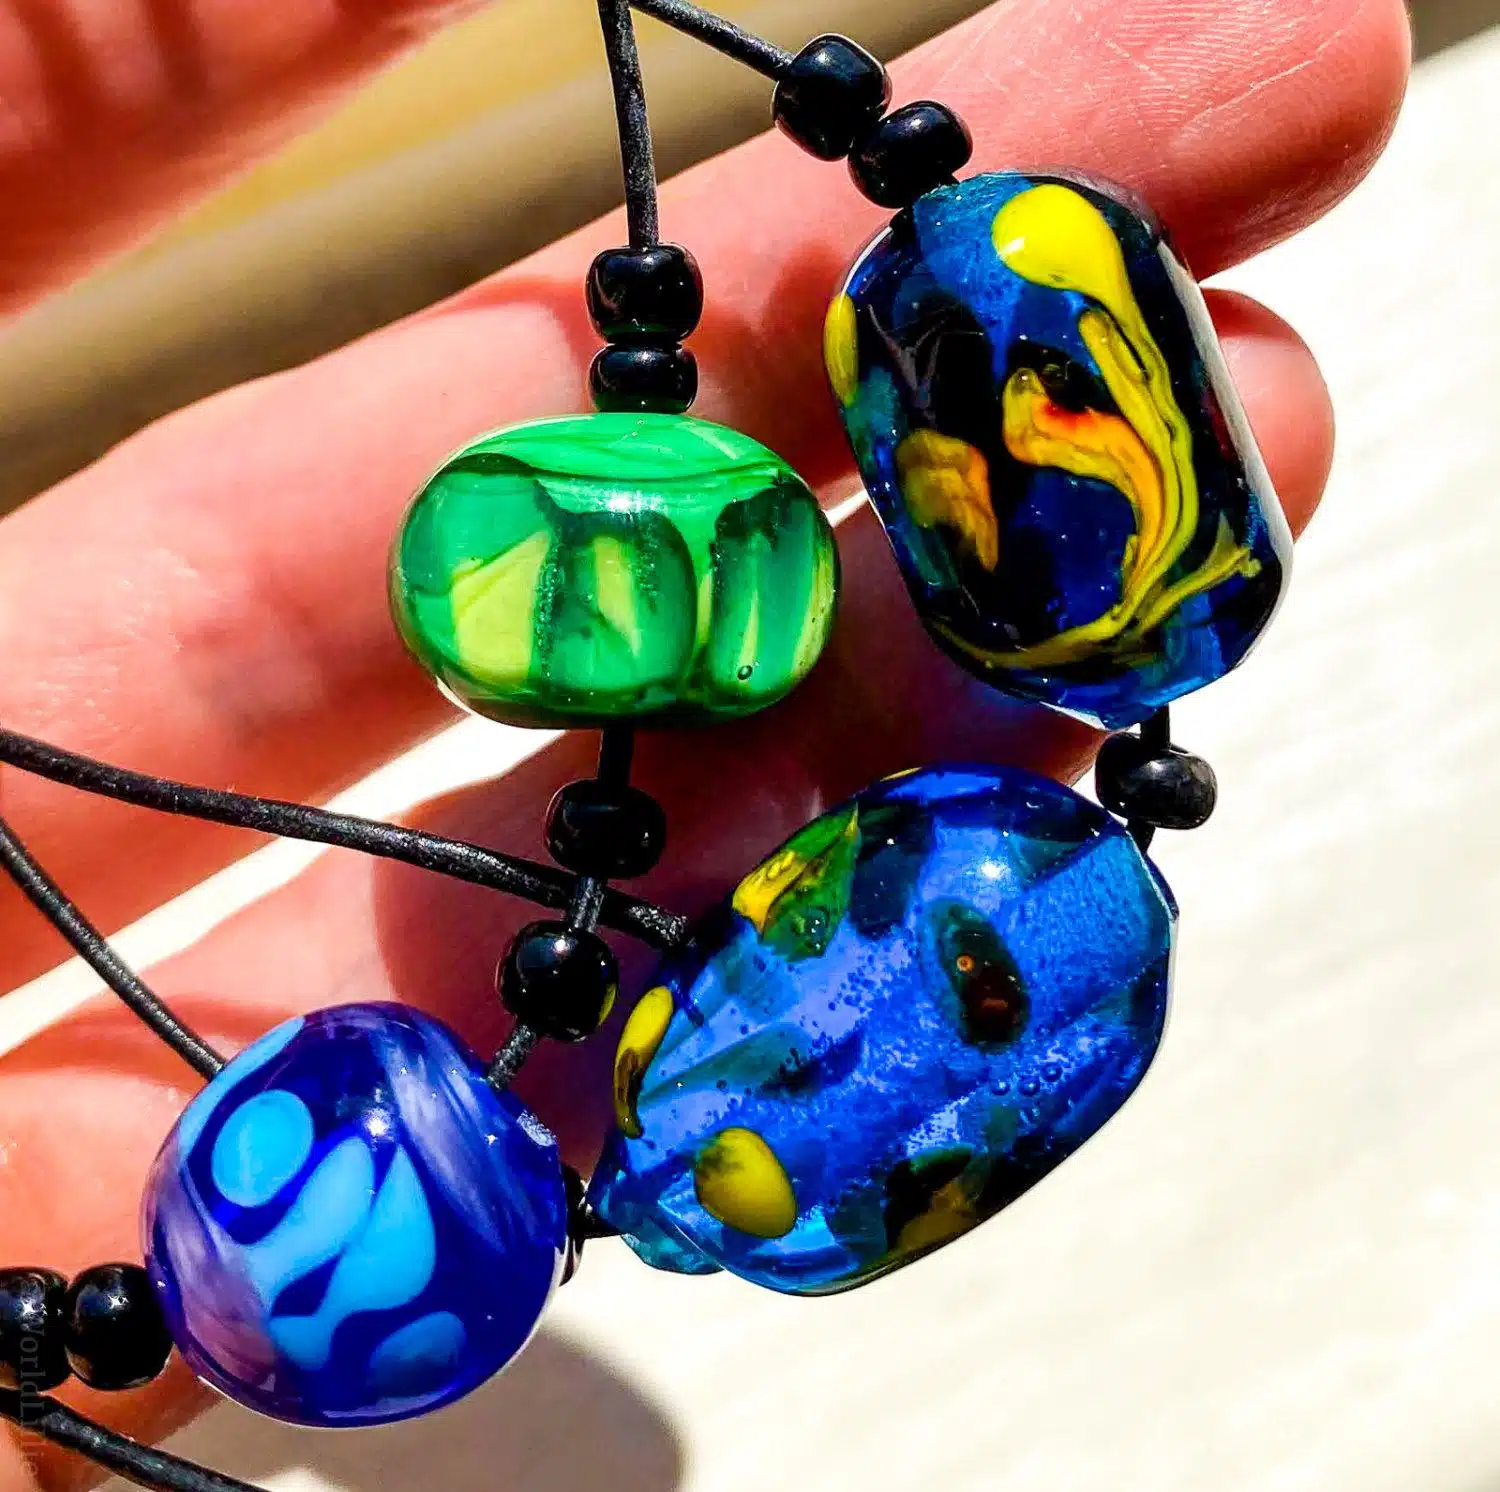 We MADE these glass beads?!